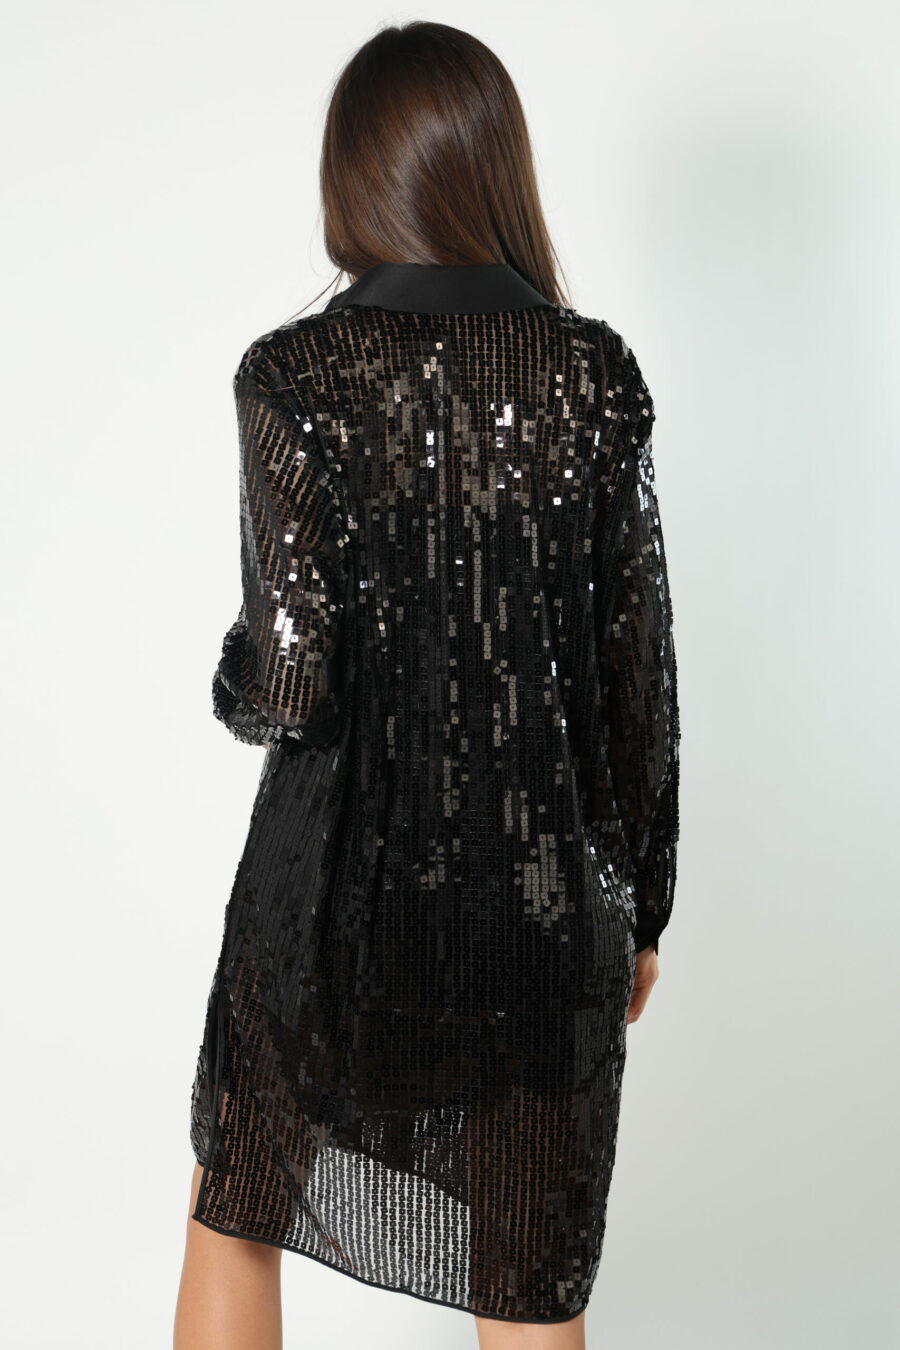 Black tunic dress with sequins - 8052865435499 545 scaled